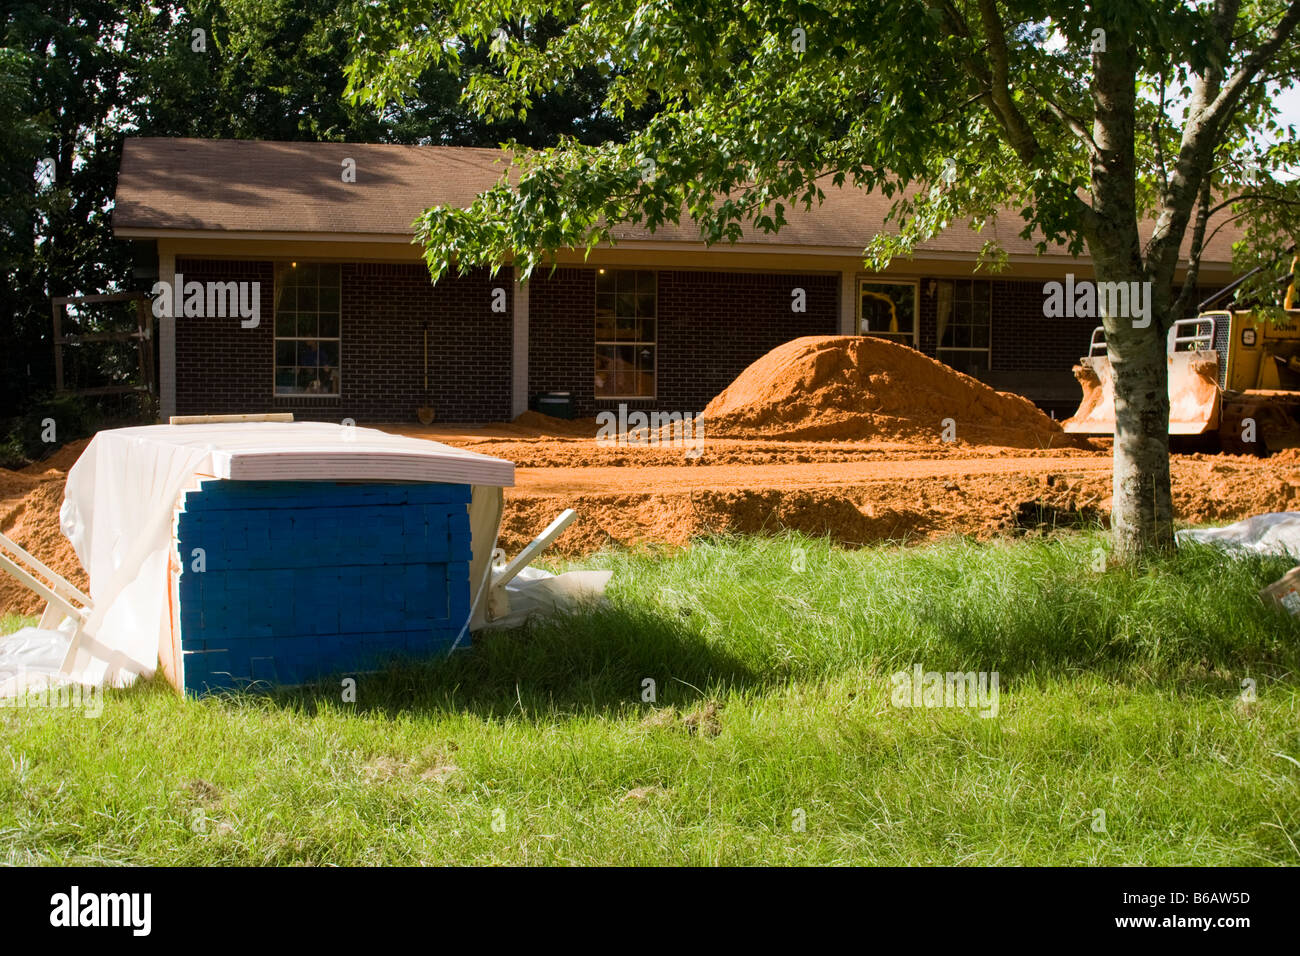 Construction project beginning for home renovation. Stock Photo